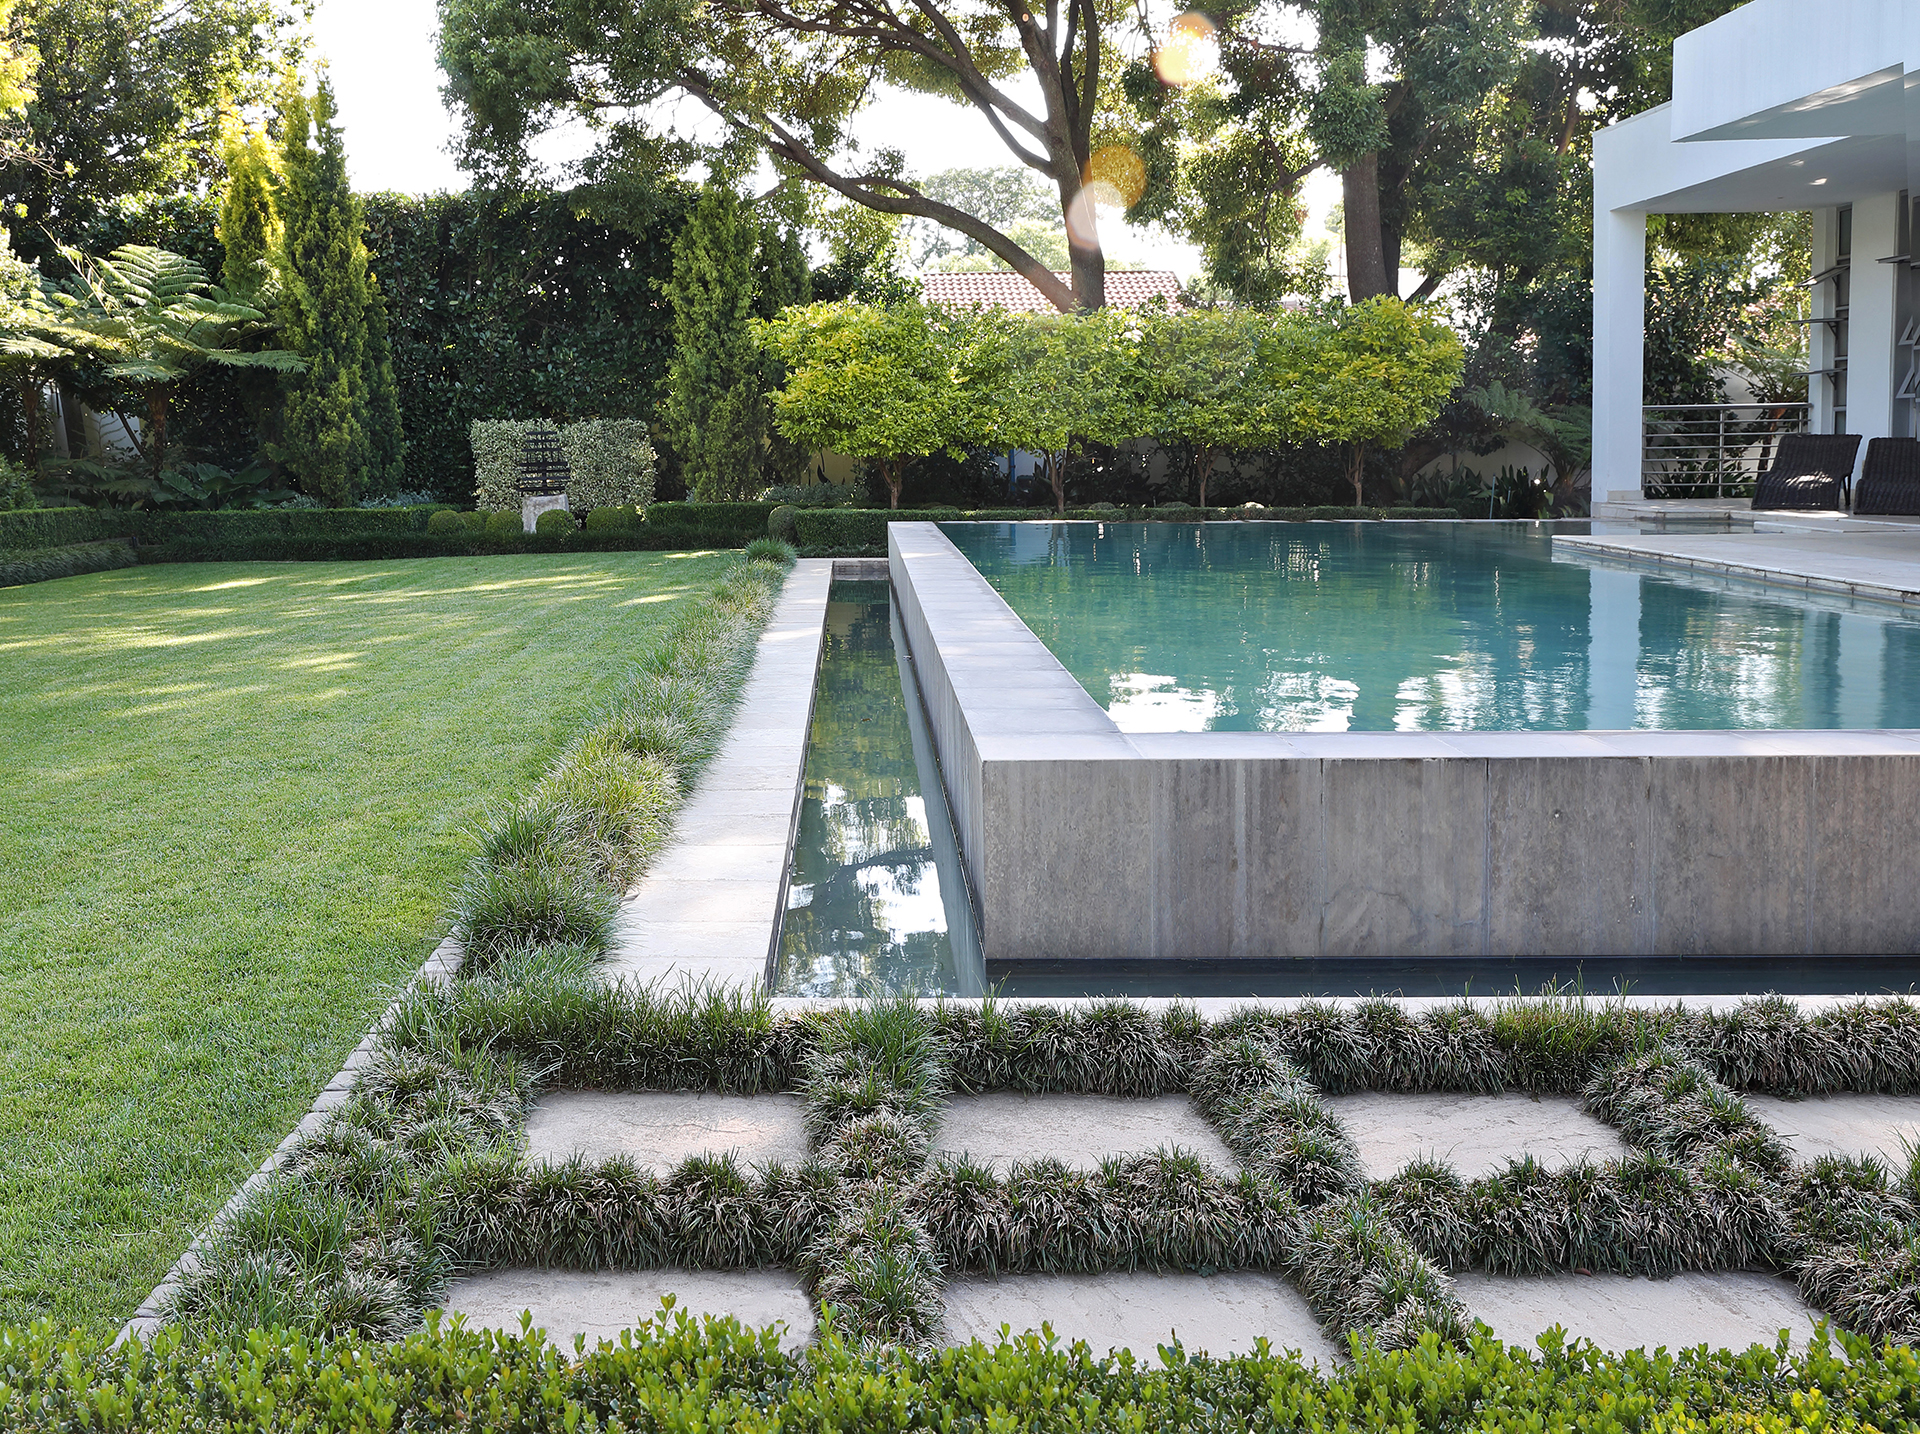 Beautiful image of a formal garden with large lawn, raised concrete swimming pool and planted paving stones, created by Young Garden Design.